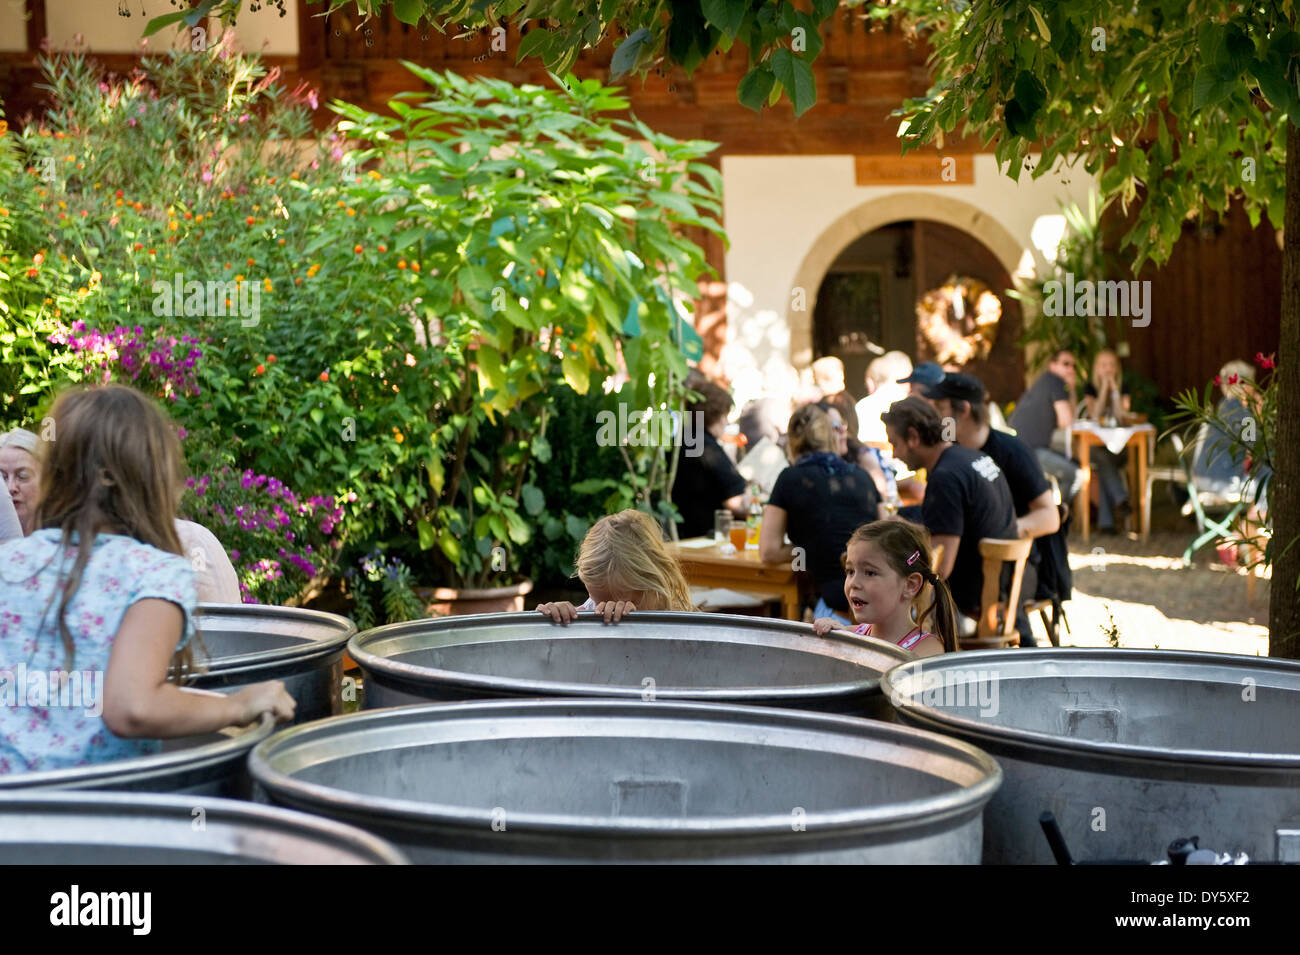 Barrels and people in front of a Strausse, traditional small restaurant, Markgraeflerland, Black Forest, Baden-Wuerttemberg, Ger Stock Photo